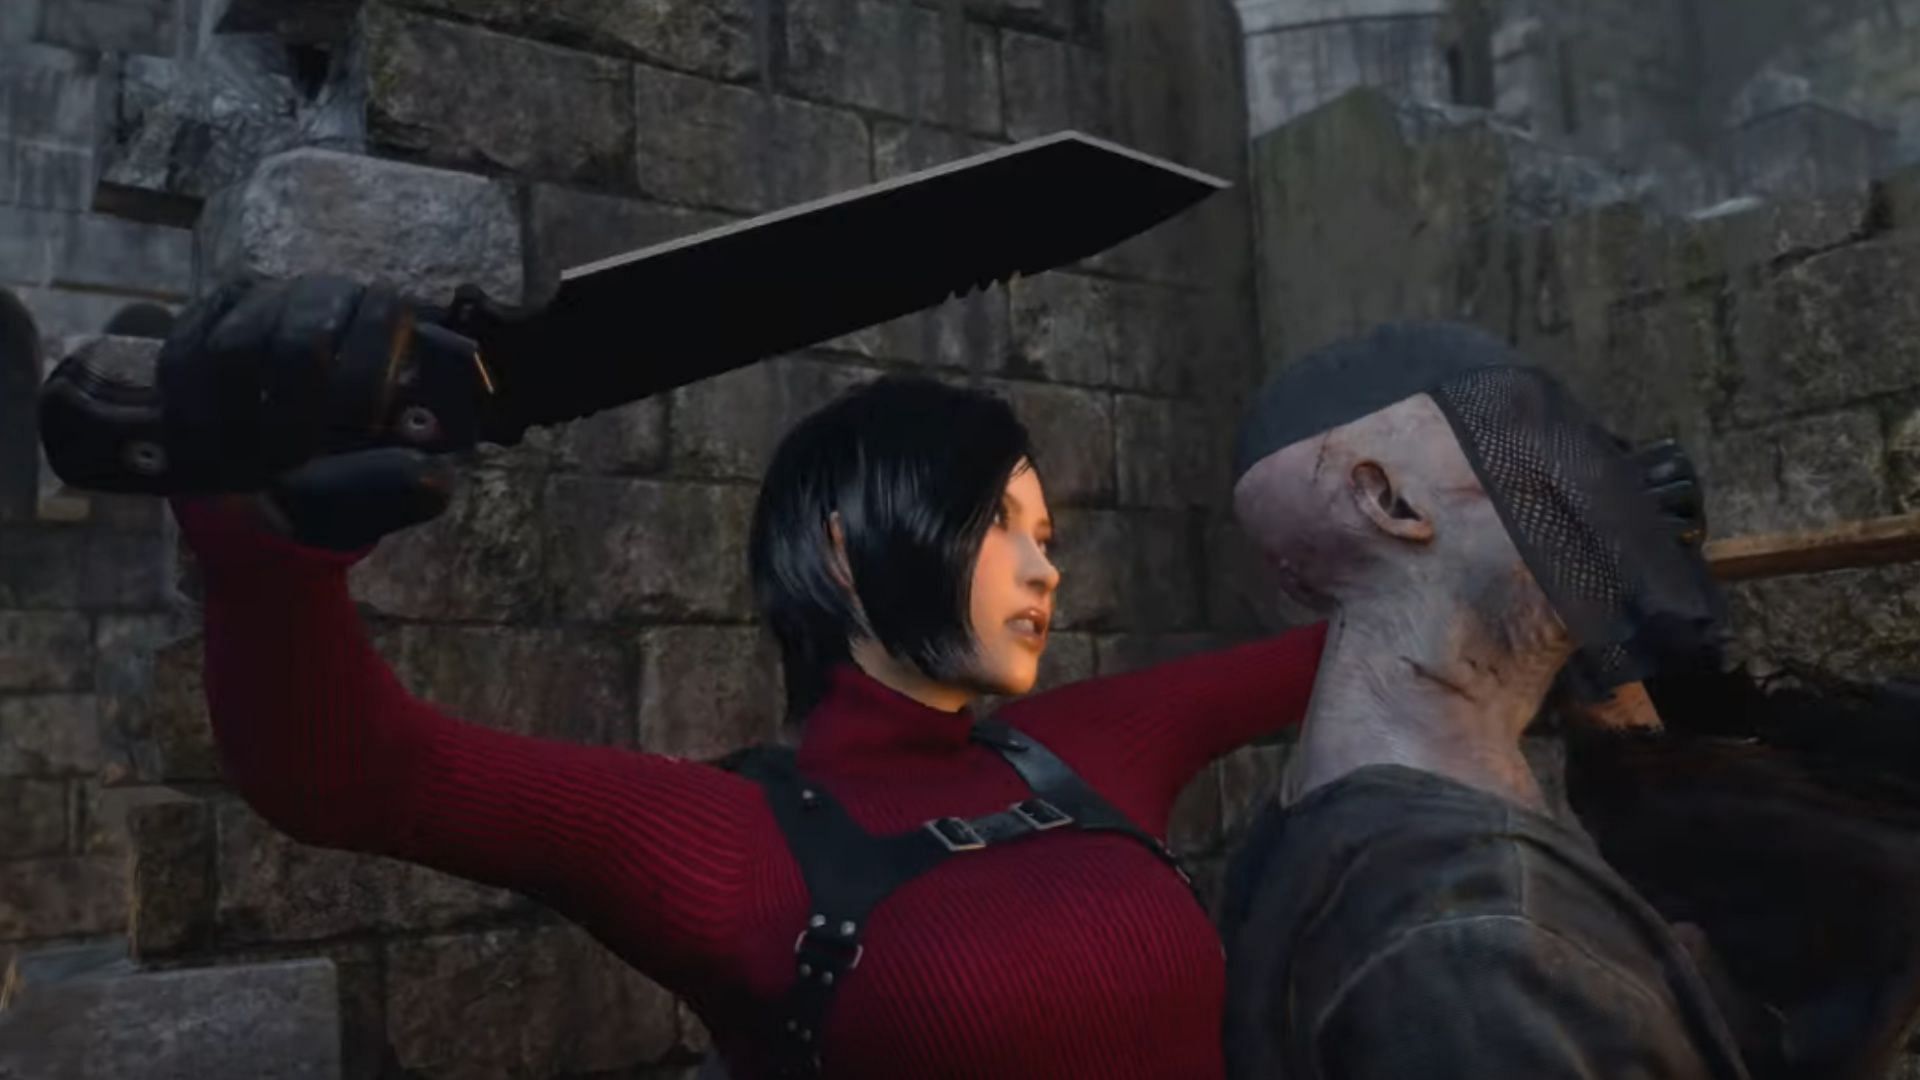 Resident Evil 4 Remake Separate Ways DLC Hands-Off Preview - Ada